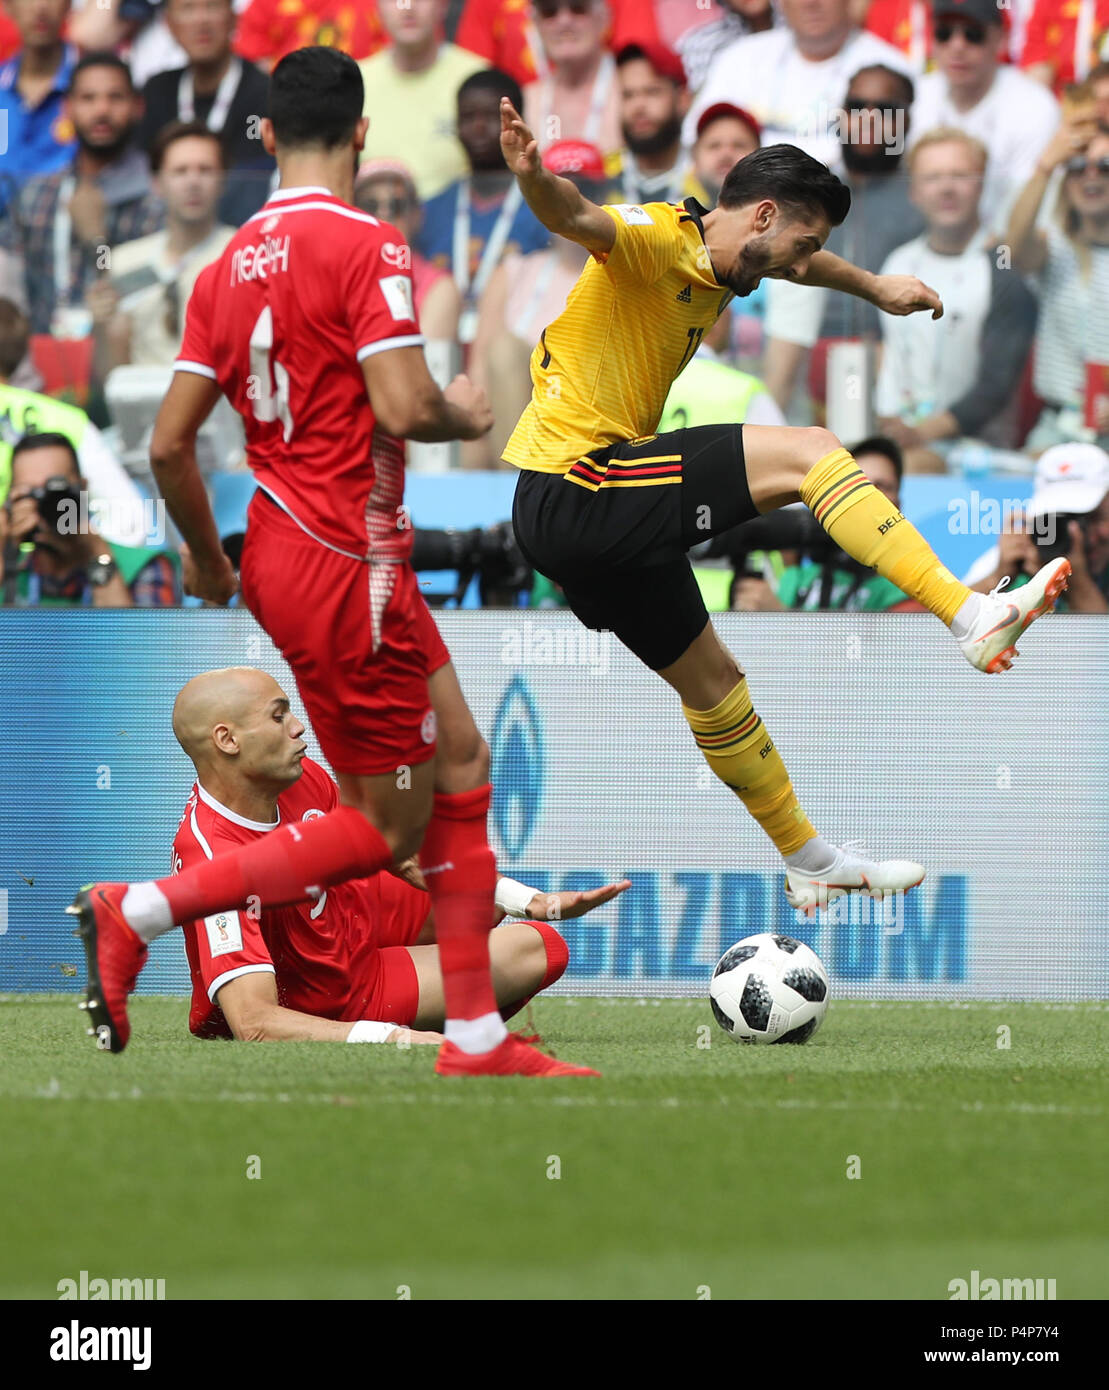 Moscow, Russia. 23rd June, 2018. Yannick Carrasco (R) of Belgium competes during the 2018 FIFA World Cup Group G match between Belgium and Tunisia in Moscow, Russia, June 23, 2018. Credit: Xu Zijian/Xinhua/Alamy Live News Stock Photo